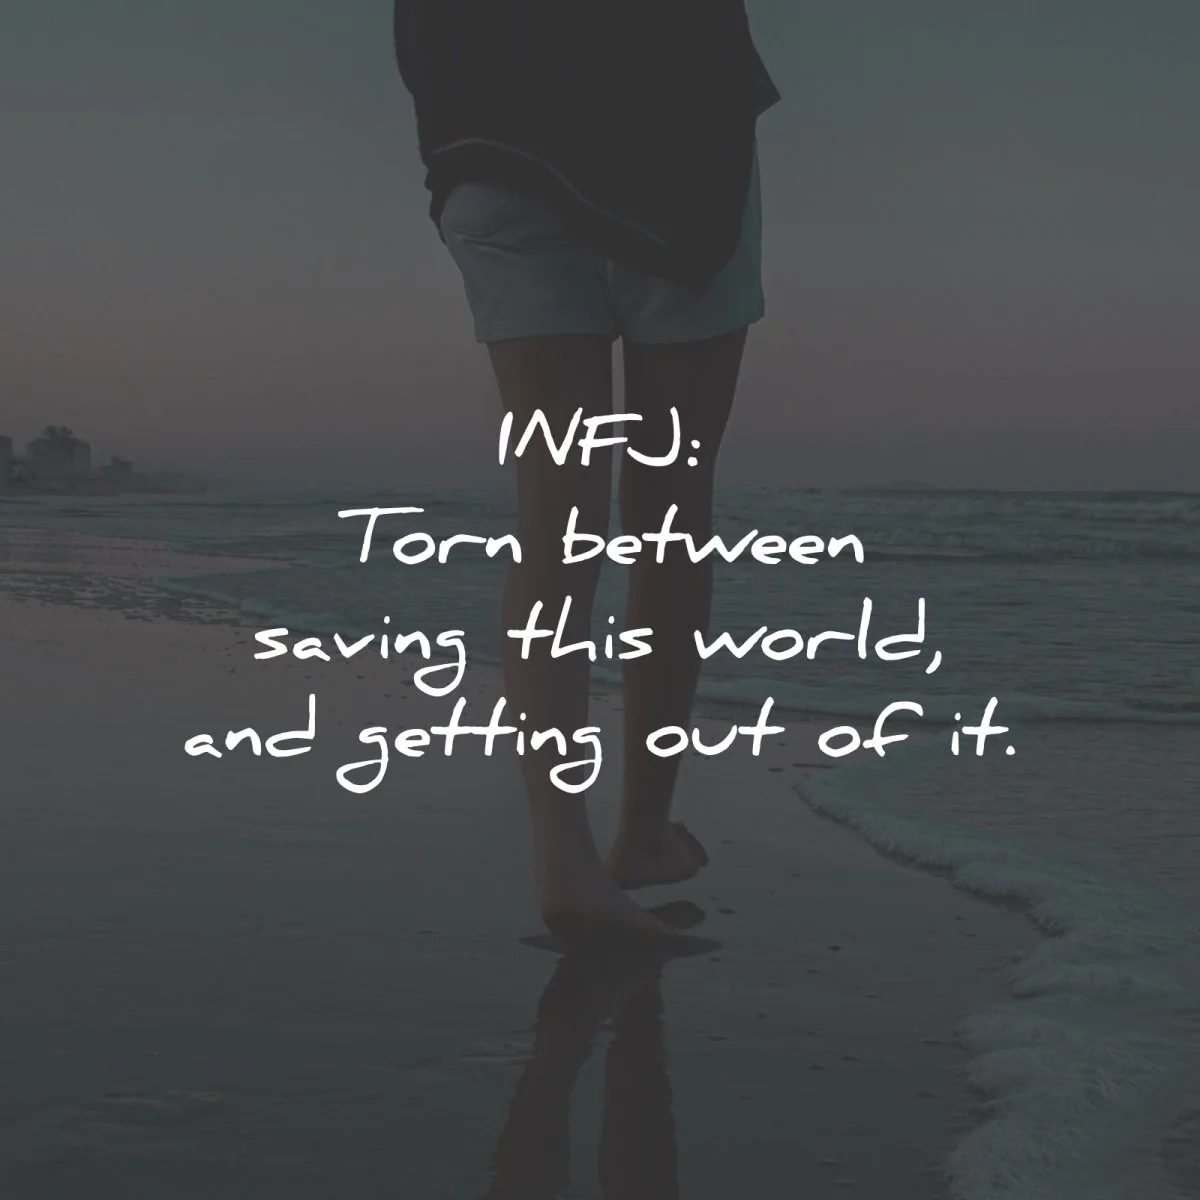 infj quotes torn between saving world getting out wisdom